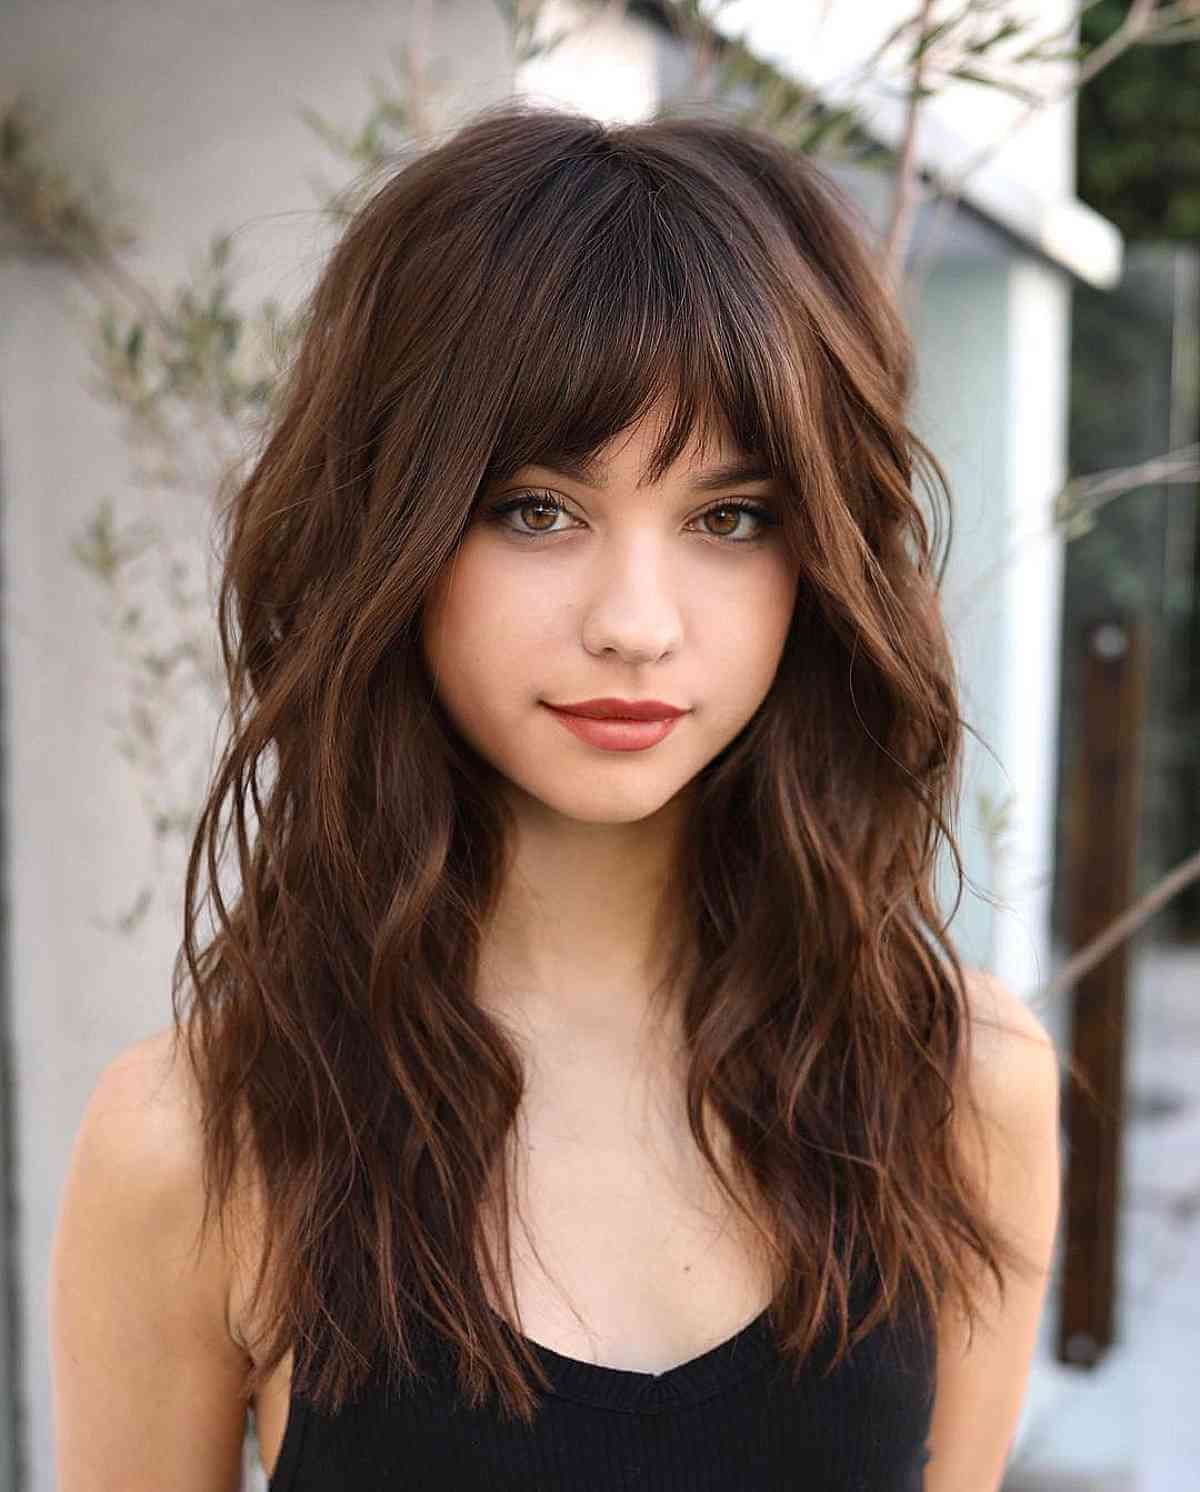 44 Trendy Medium Layered Haircuts With Bangs Within Most Current Tousled Shoulder Length Layered Hair With Bangs (View 12 of 18)